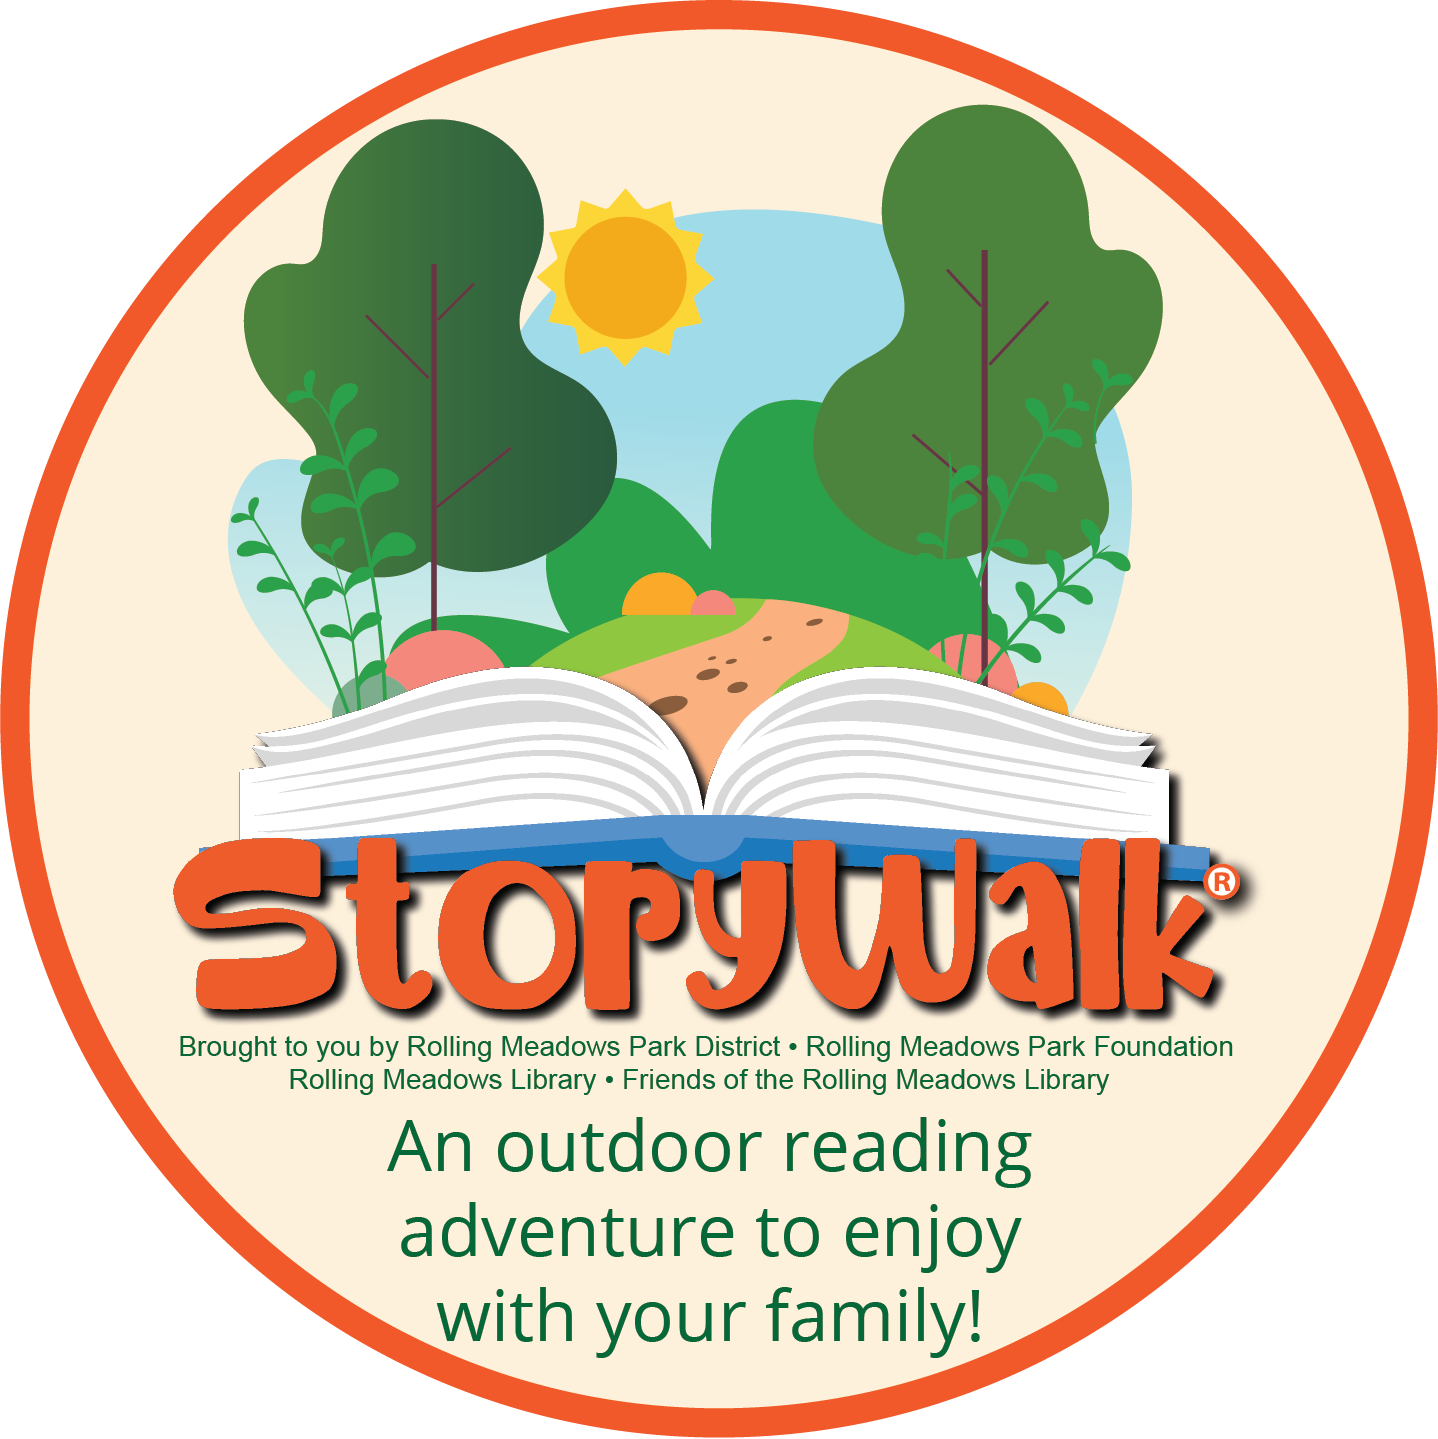 StoryWalk: An outdoor reading adventure to enjoy with your family!